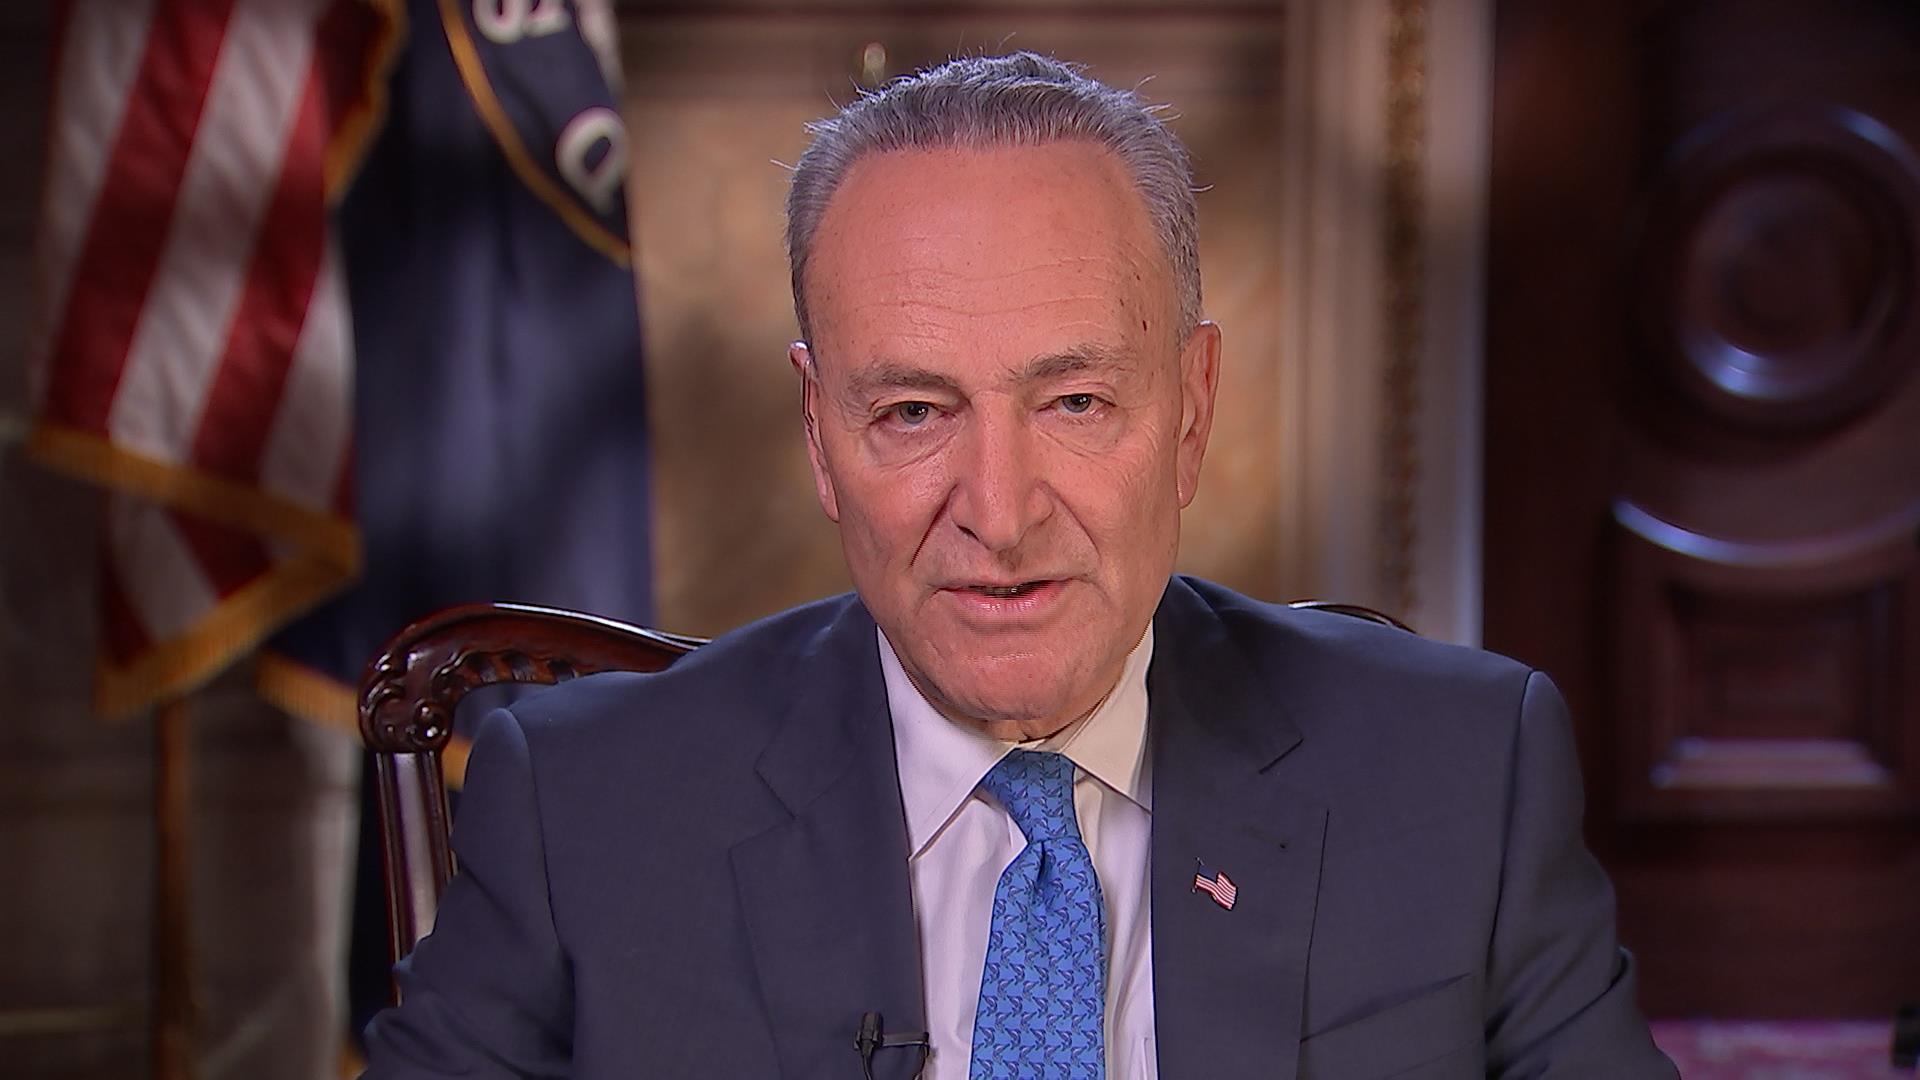 Full Chuck Schumer Interview: 'You Can't Flinch' After Election Loss